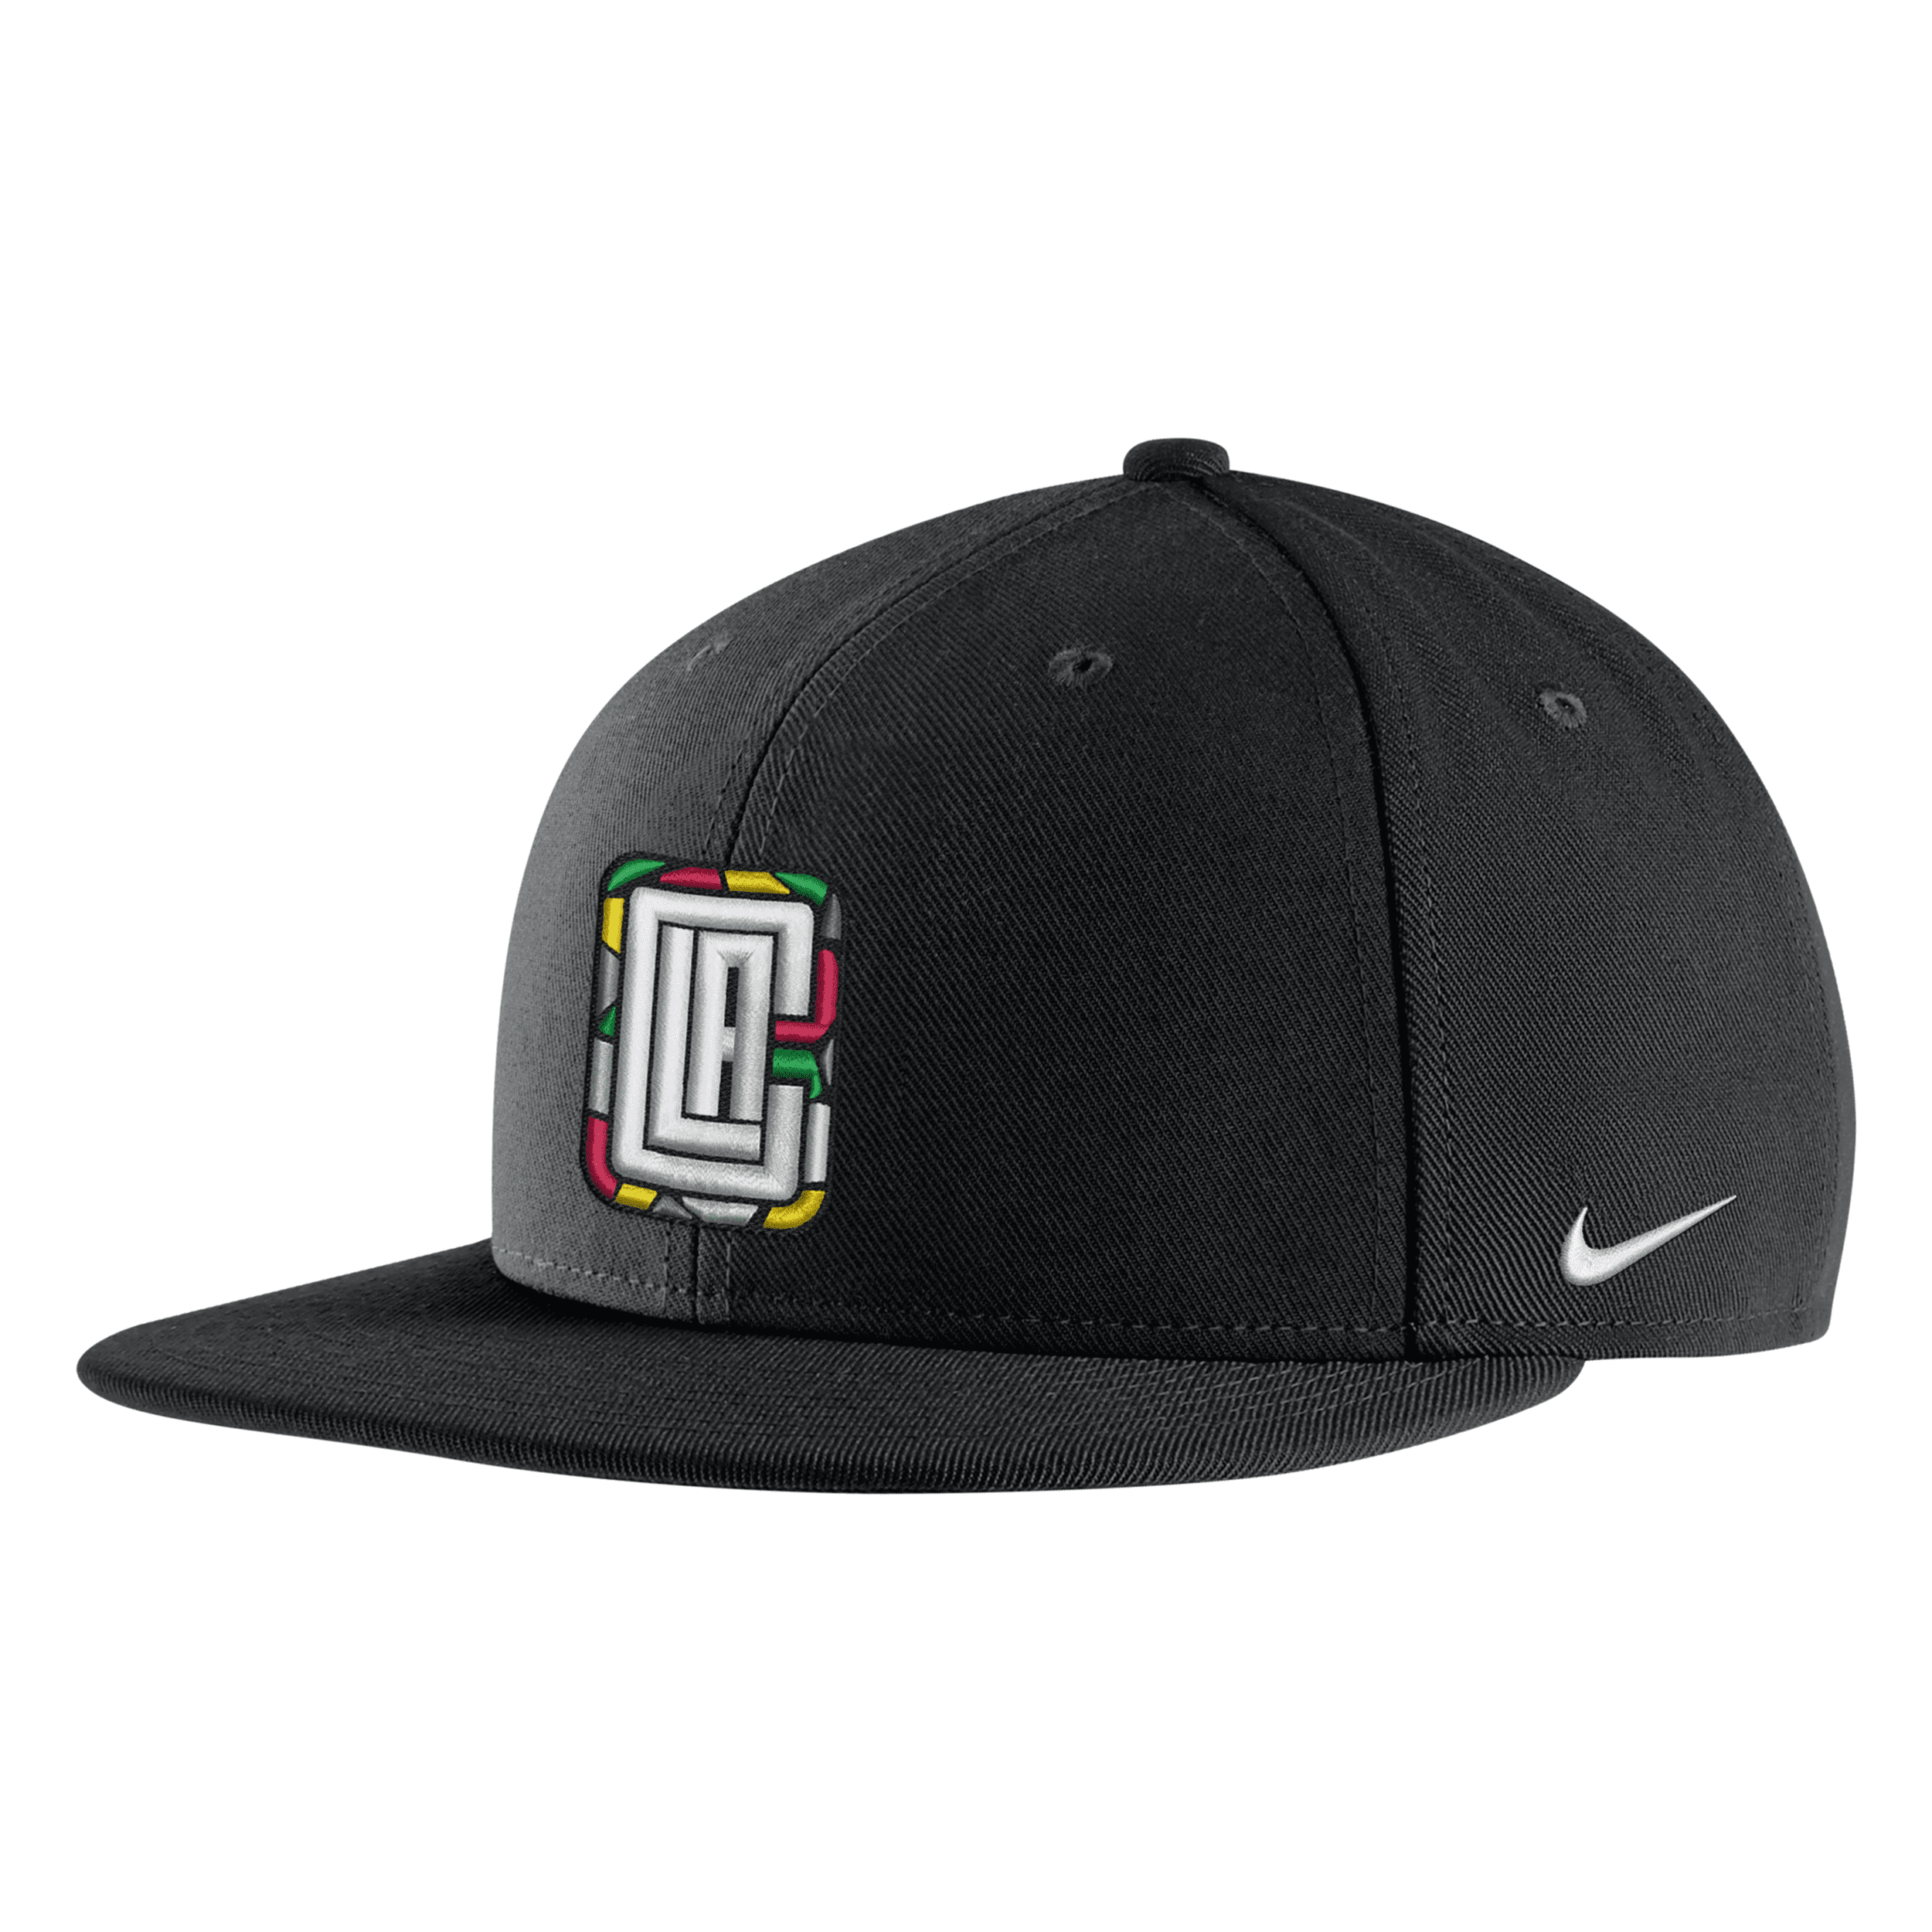 Los Angeles Clippers Snapback